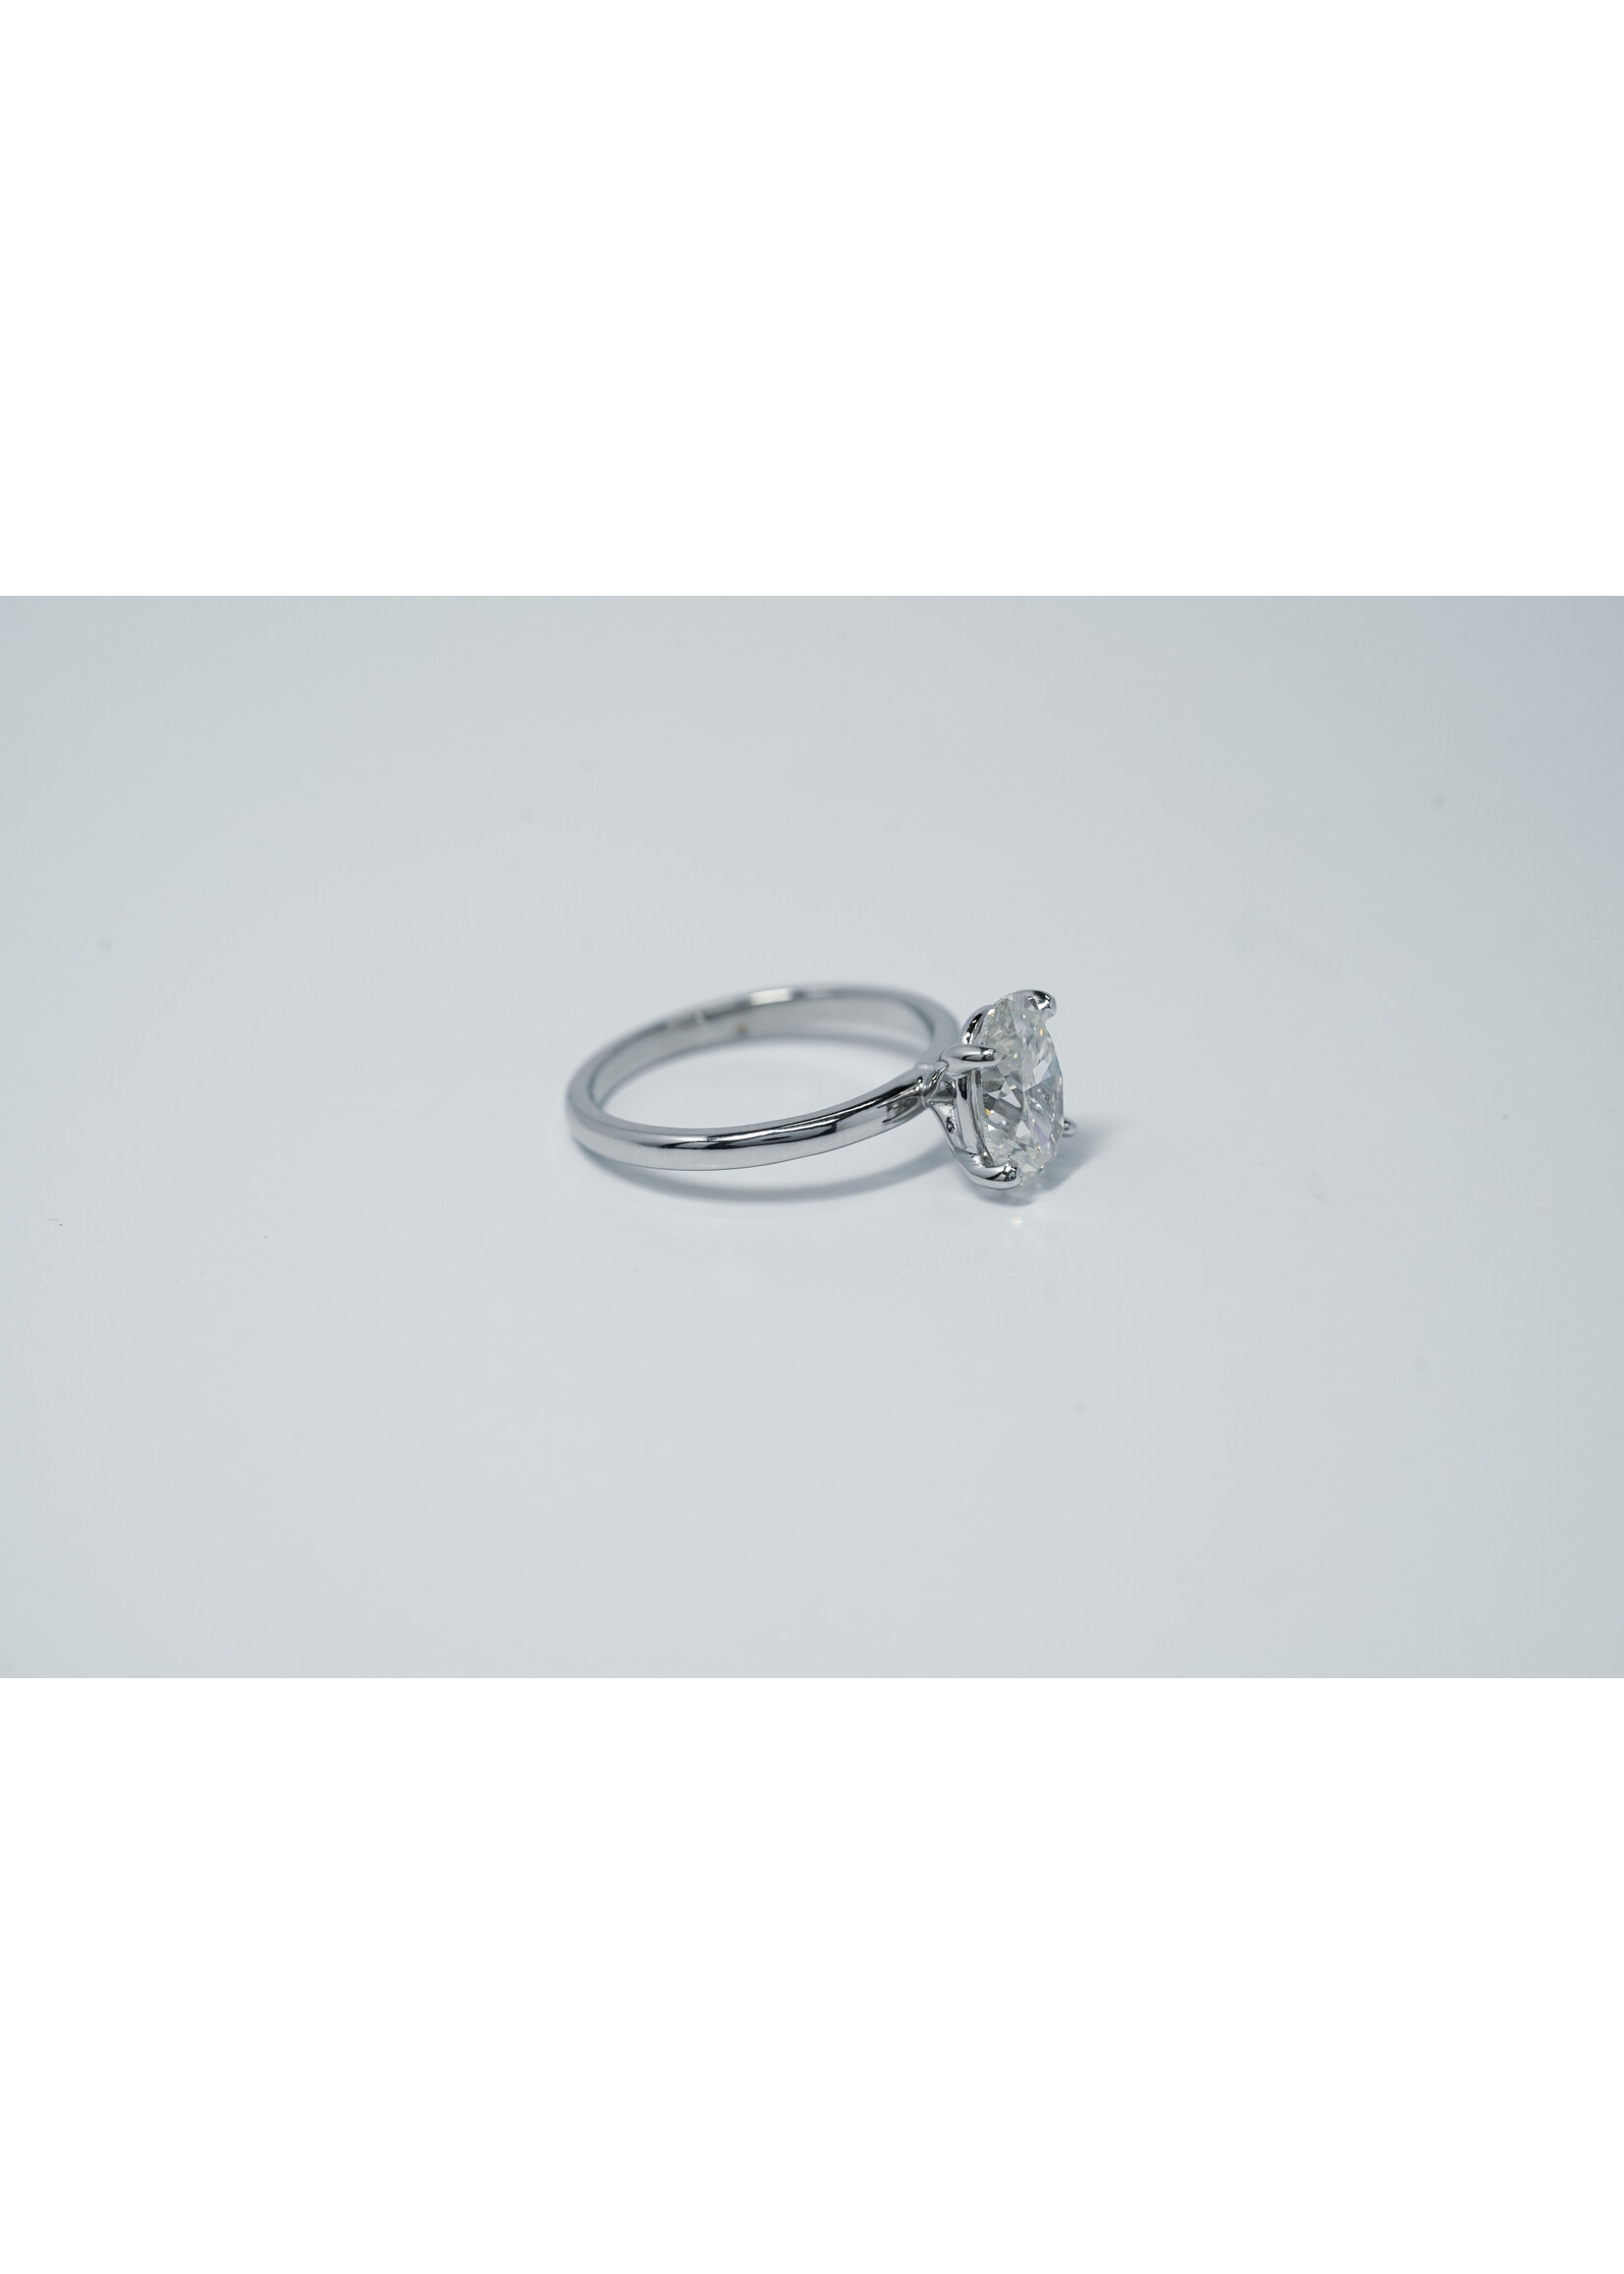 14KW 2.68g 2.01ct I/SI1 GIA Oval Solitaire Engagement Ring (size 7)